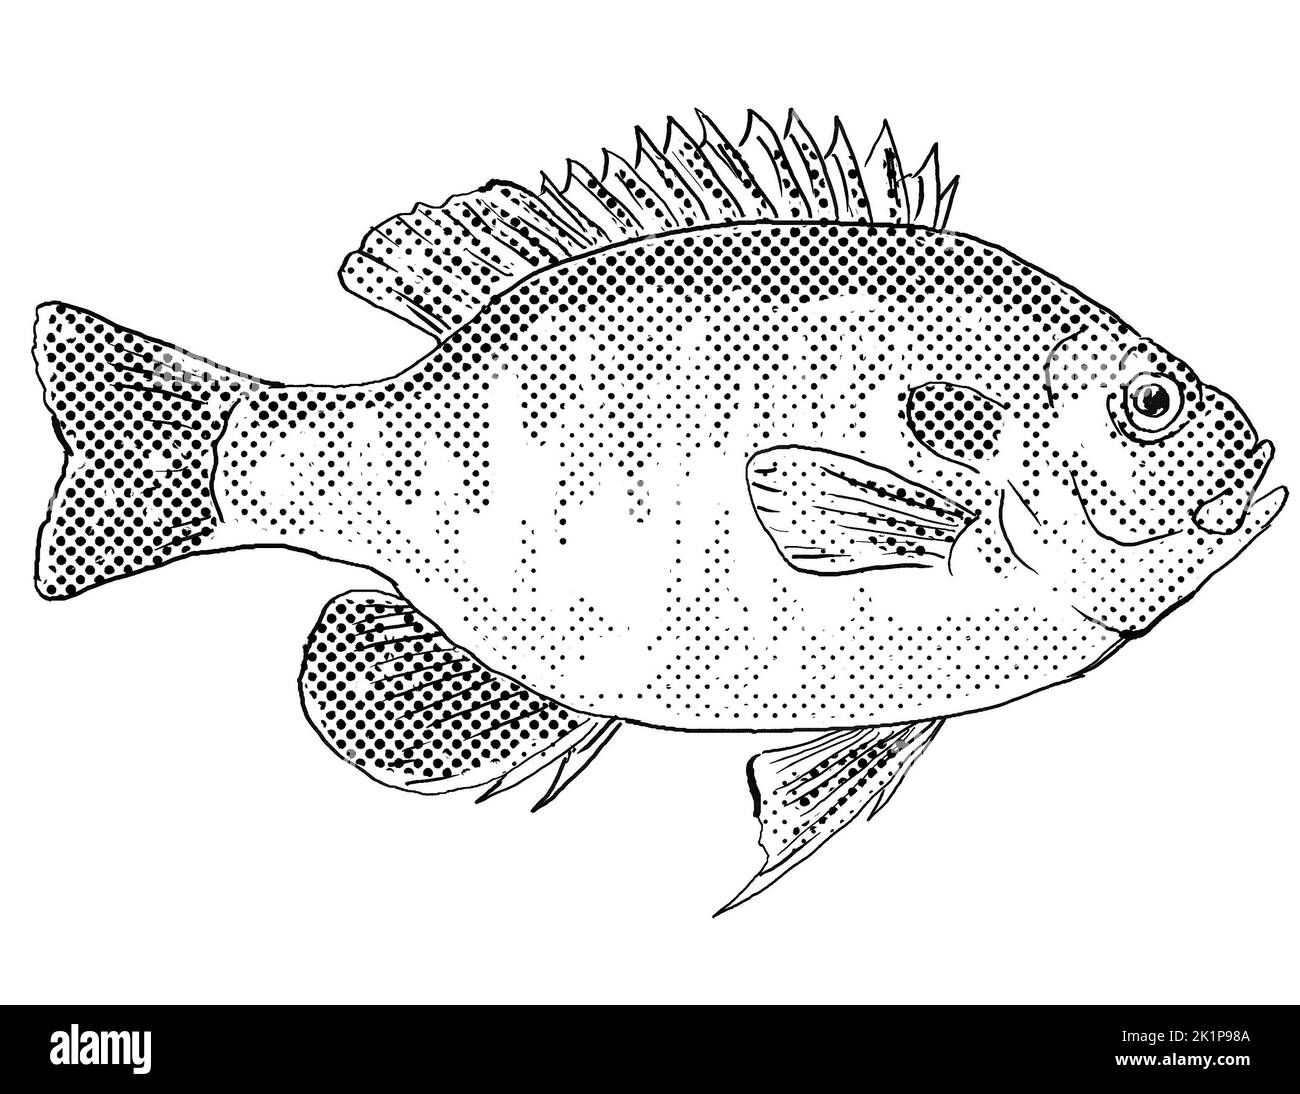 Cartoon style line drawing of a redspotted sunfish Lepomis miniatus or stumpknocker a freshwater fish endemic to North America with halftone dots shad Stock Photo